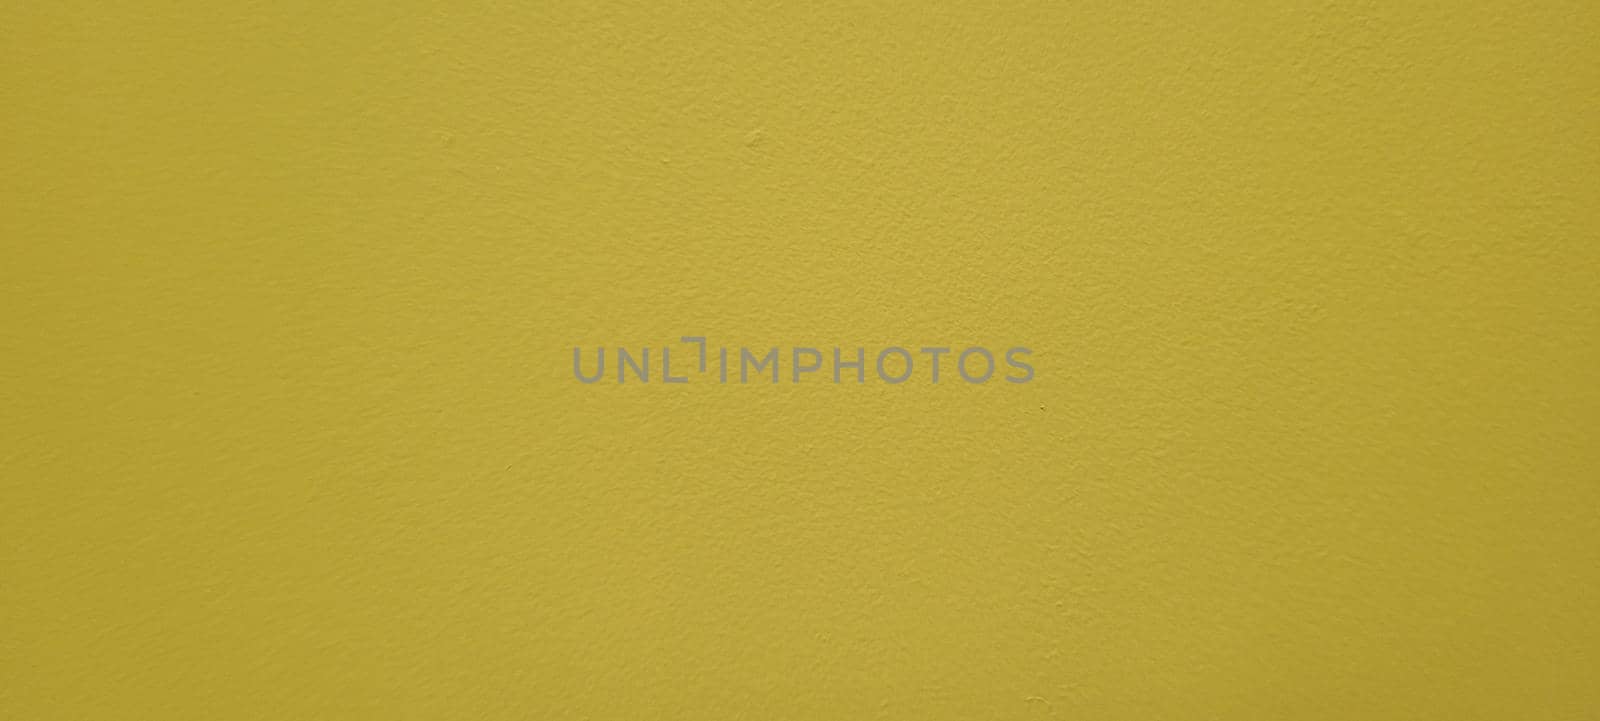 light yellow and gold background with shadow by sarsa